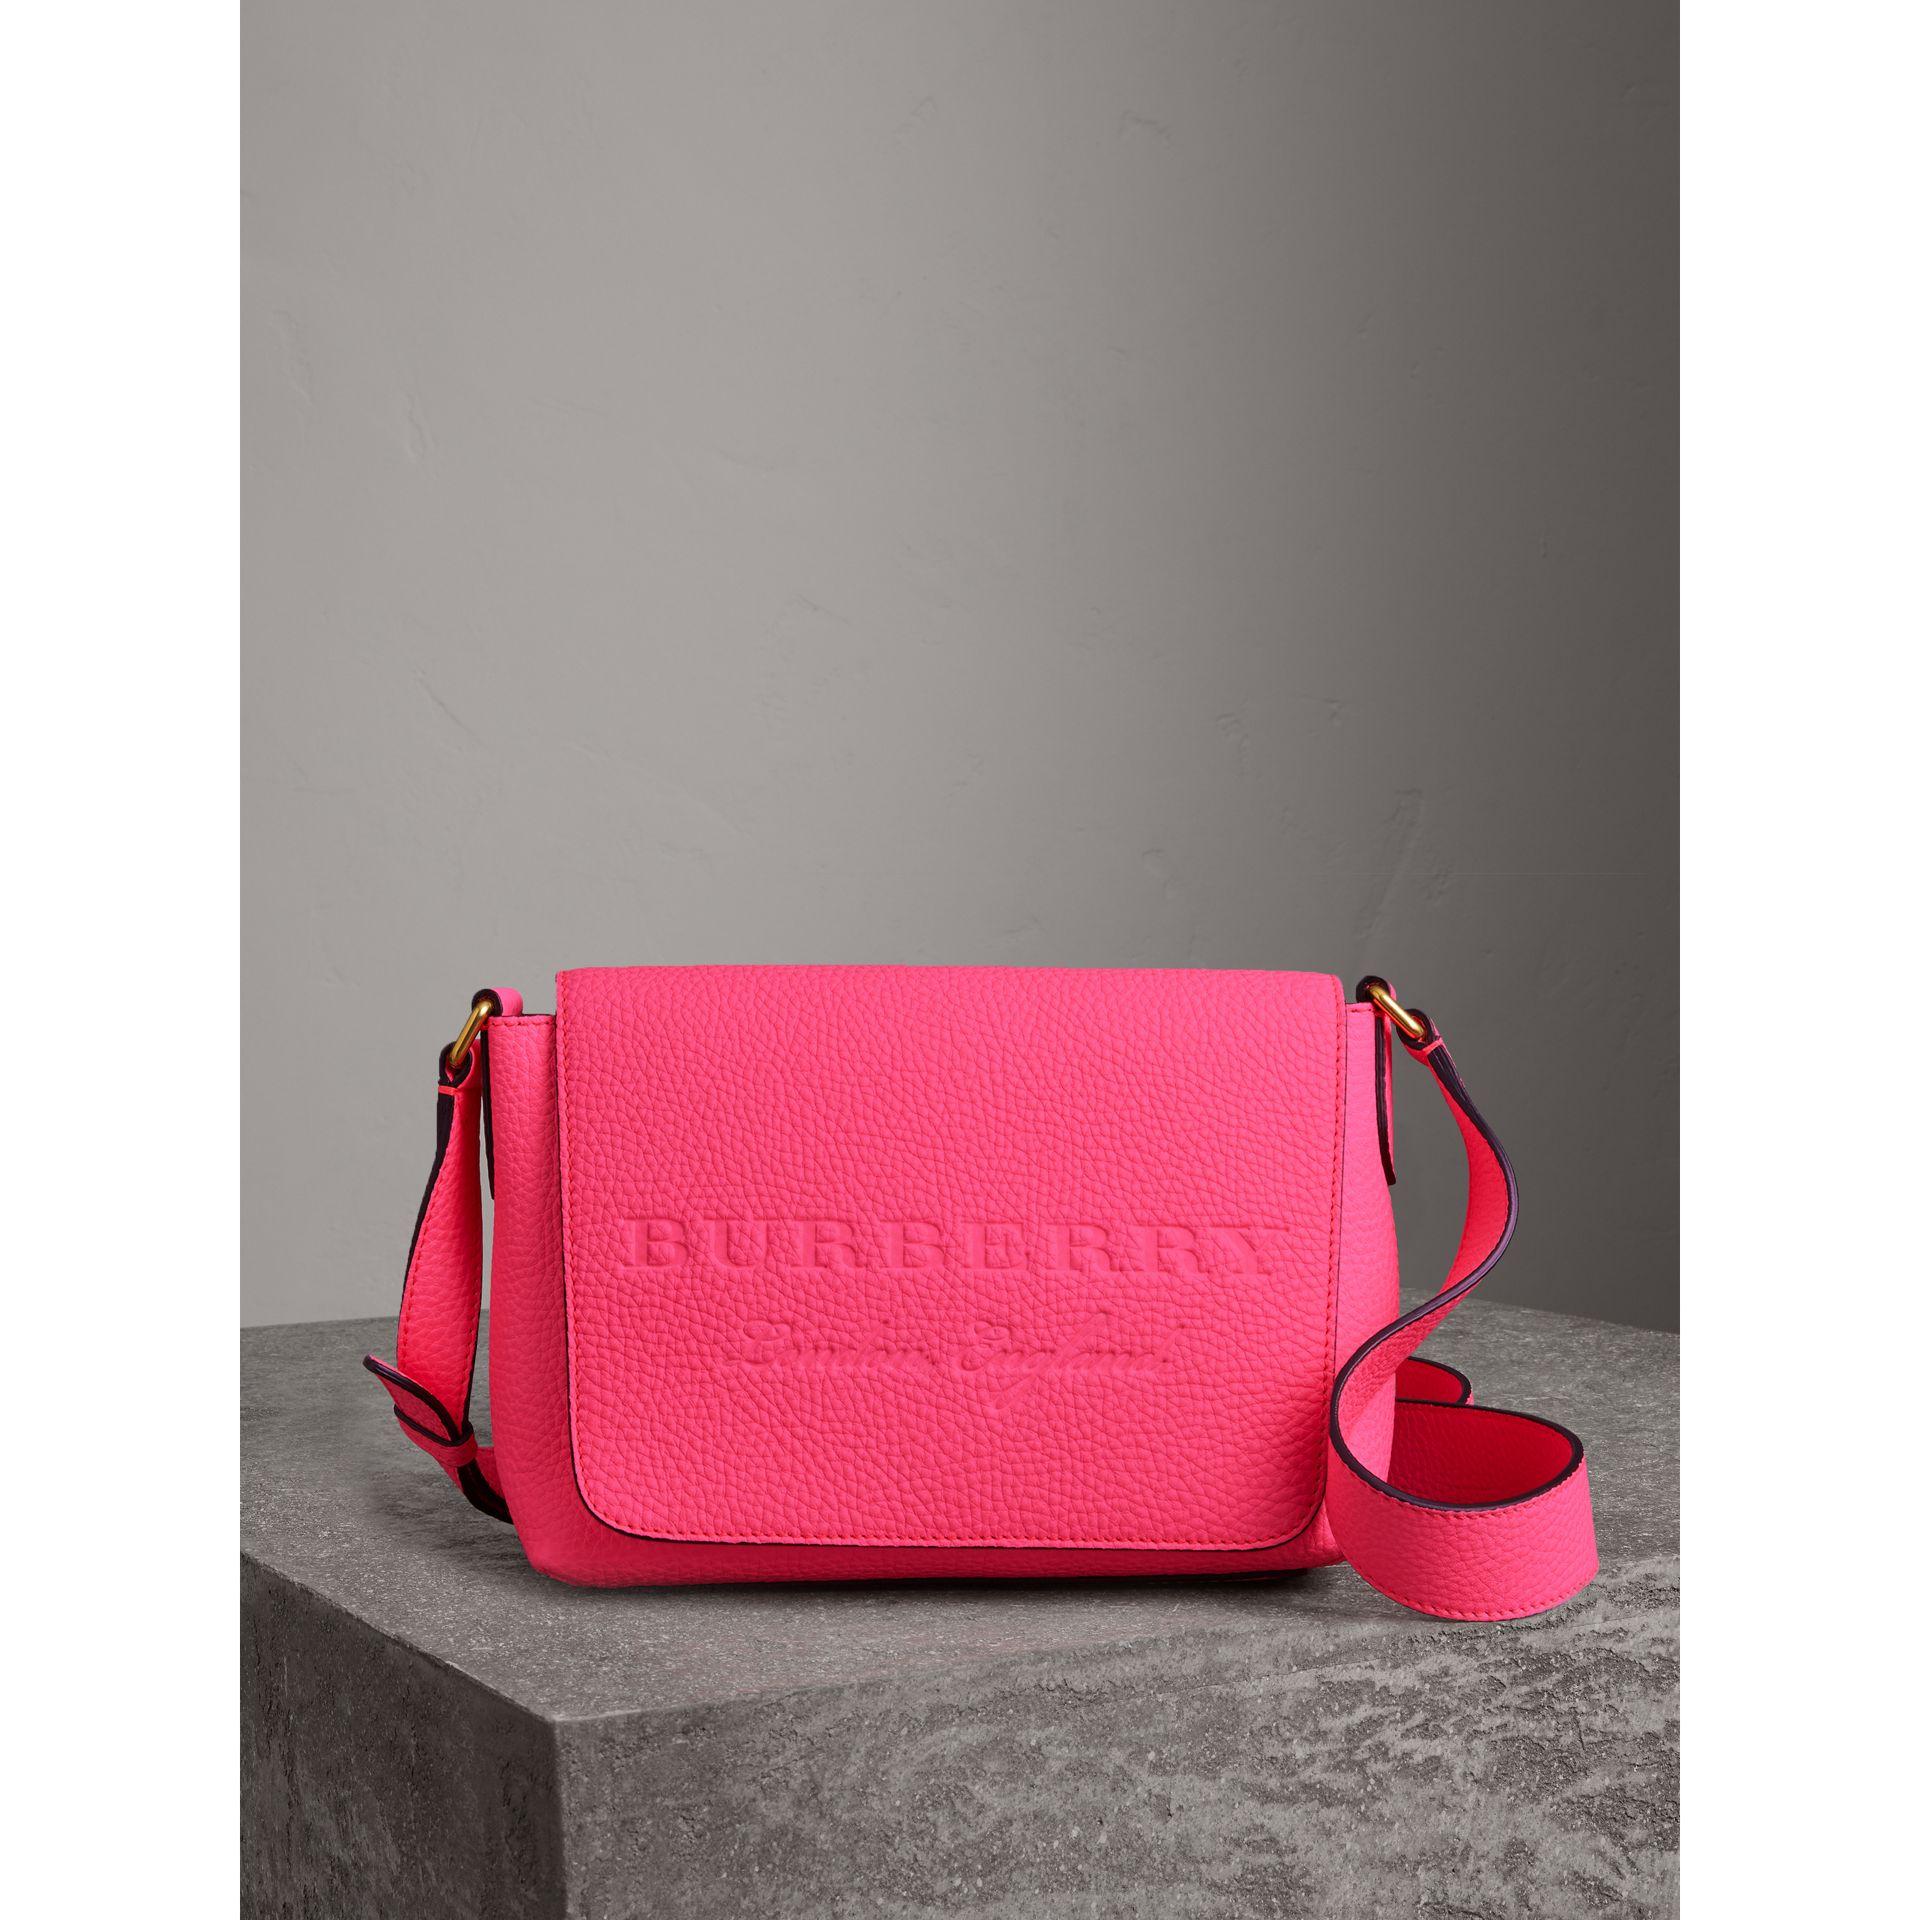 Burberry Small Embossed Neon Leather 